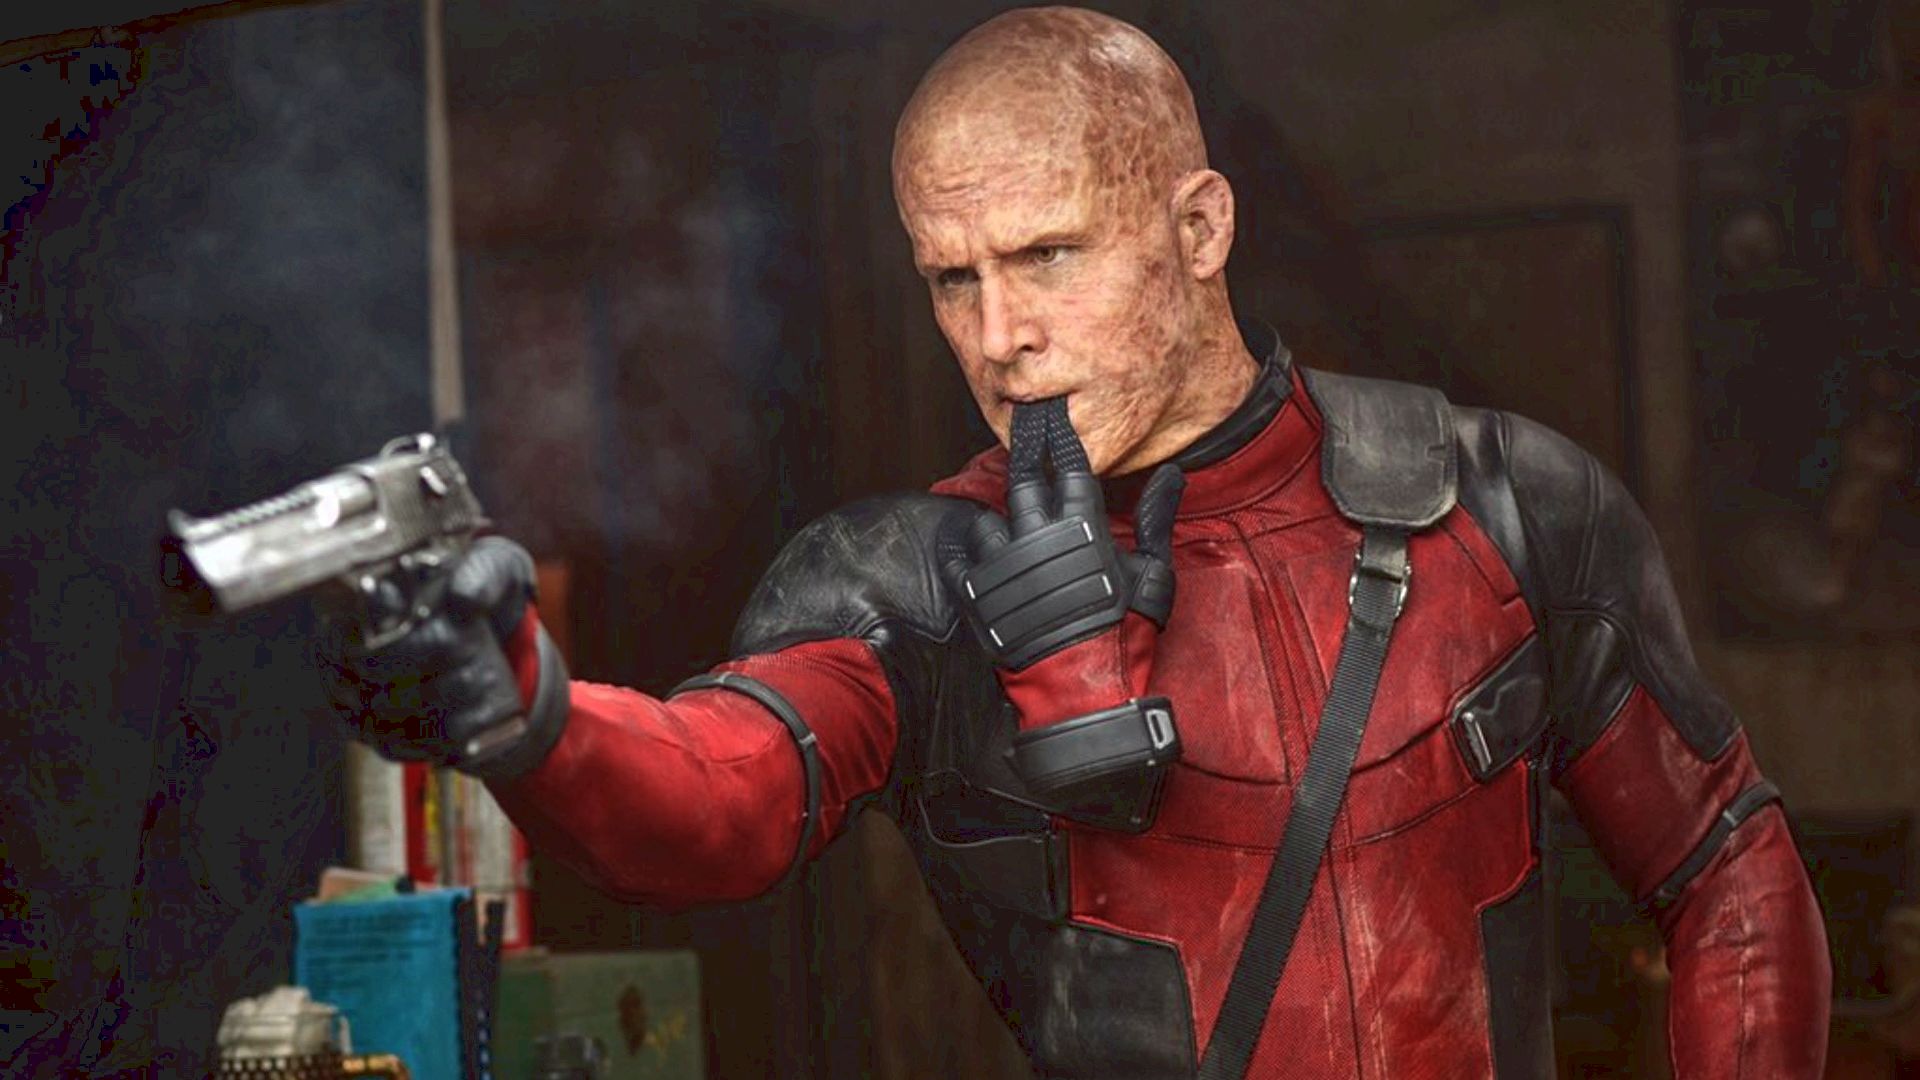 DEADPOOL IMAX TV Spot and a New Image of the Merc With His Mask Off